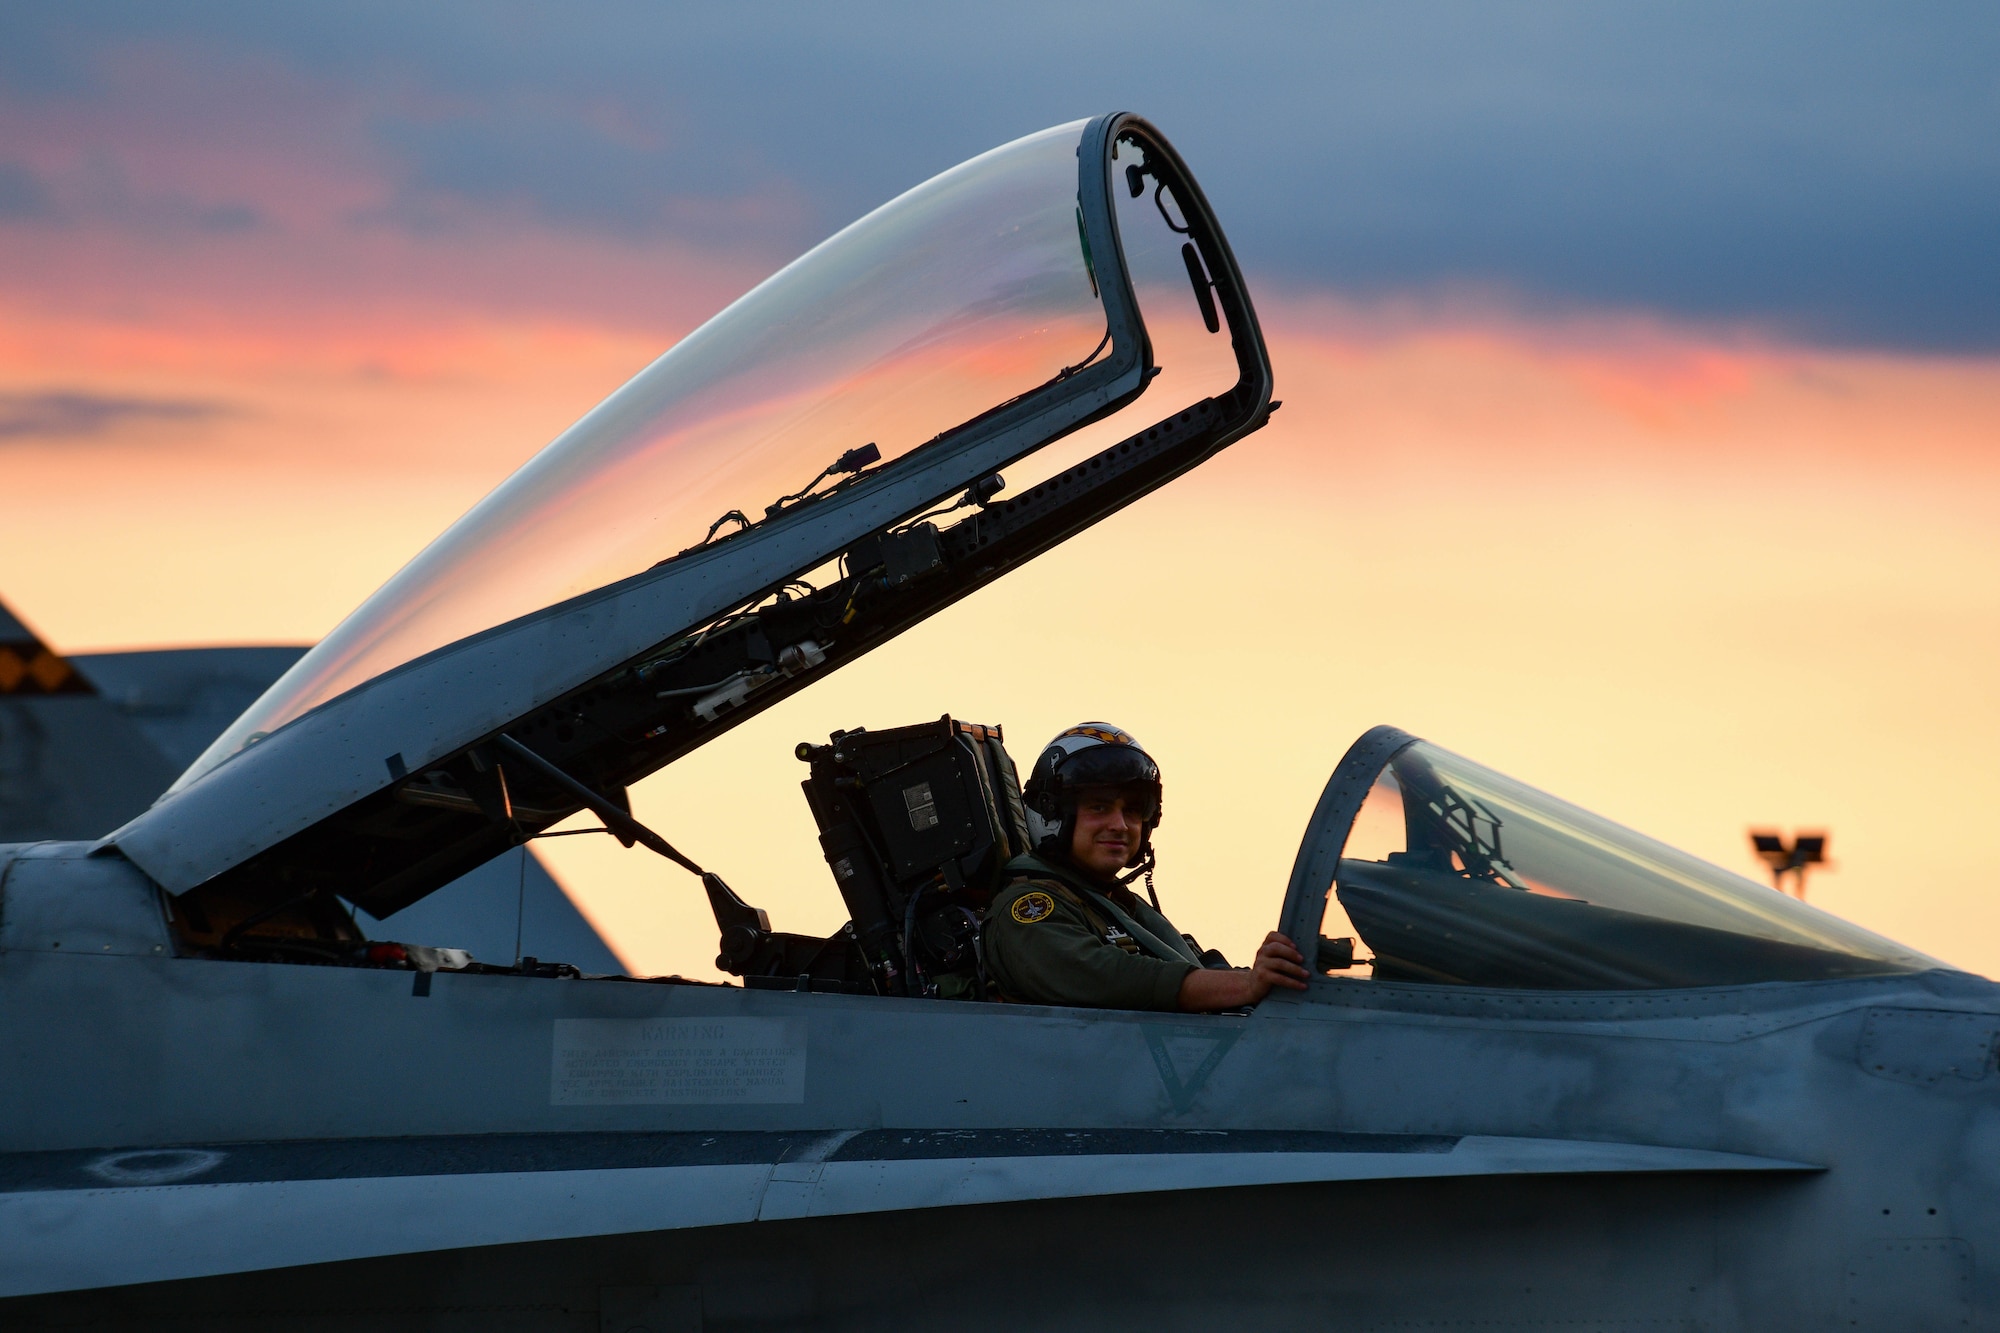 A United States Marine F/A-18 Hornet pilot assigned to the Marine Fighter Attack Squadron 323 out of Marine Corps Air Station Miramar, California, prepares to fly at Aviano Air Base, Italy, Sept. 20, 2022. During the training sorties, the VMFA-323 Squadron fought as an element alongside the 510th Fighter Squadron, meaning two F-16s or two F-18s worked together to defeat a simulated threat as quickly as possible. (U.S. Air Force photo by Senior Airman Brooke Moeder)